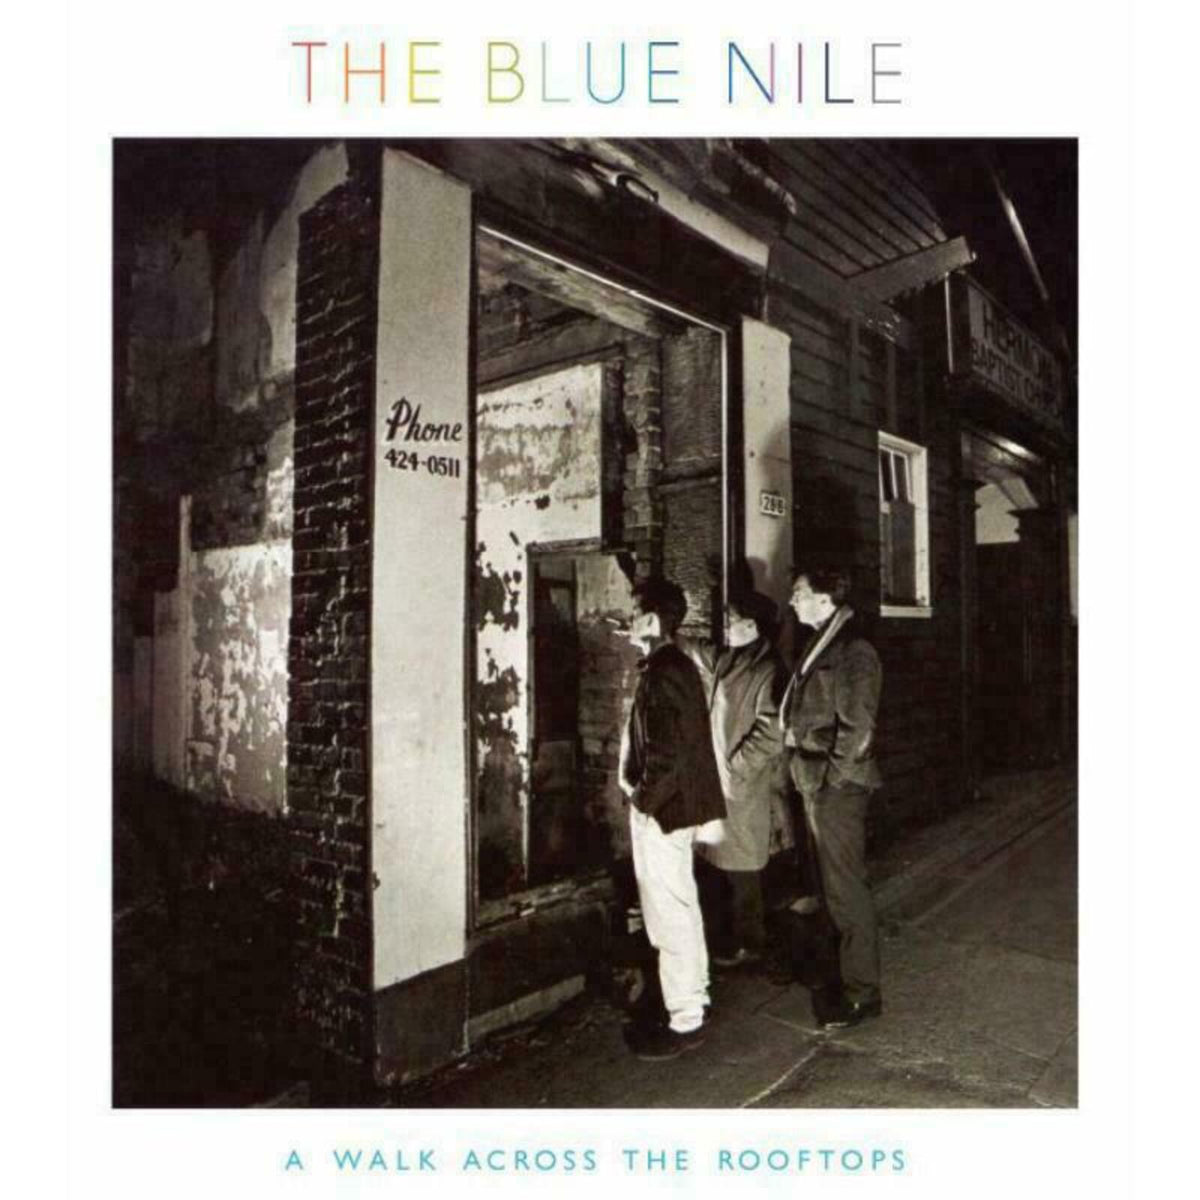 The Blue Nile - A Walk Across The Rooftops (LP) - BLUELP001